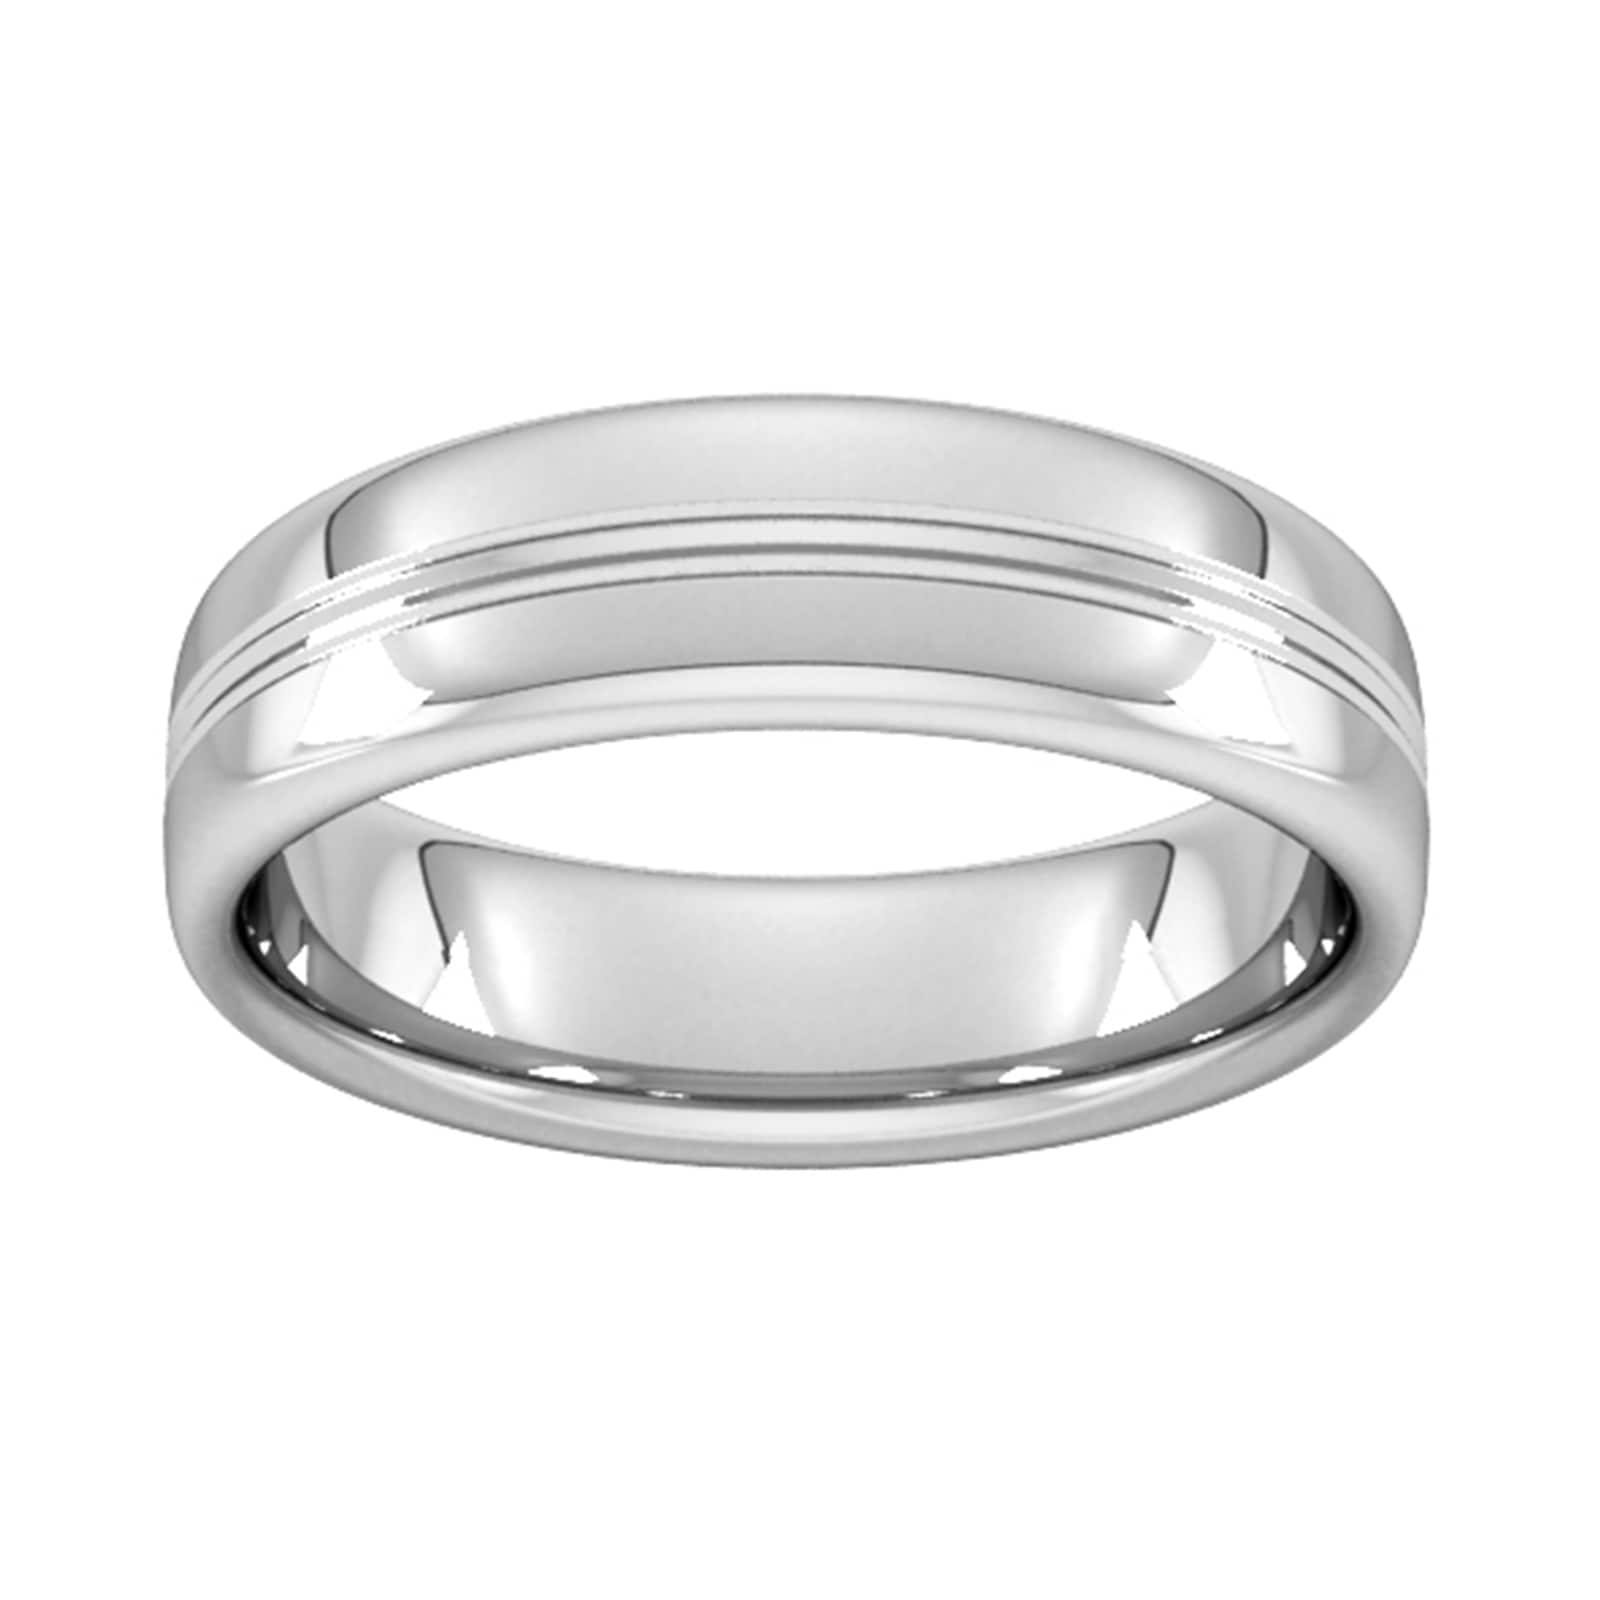 6mm Slight Court Heavy Grooved Polished Finish Wedding Ring In 9 Carat White Gold - Ring Size Q